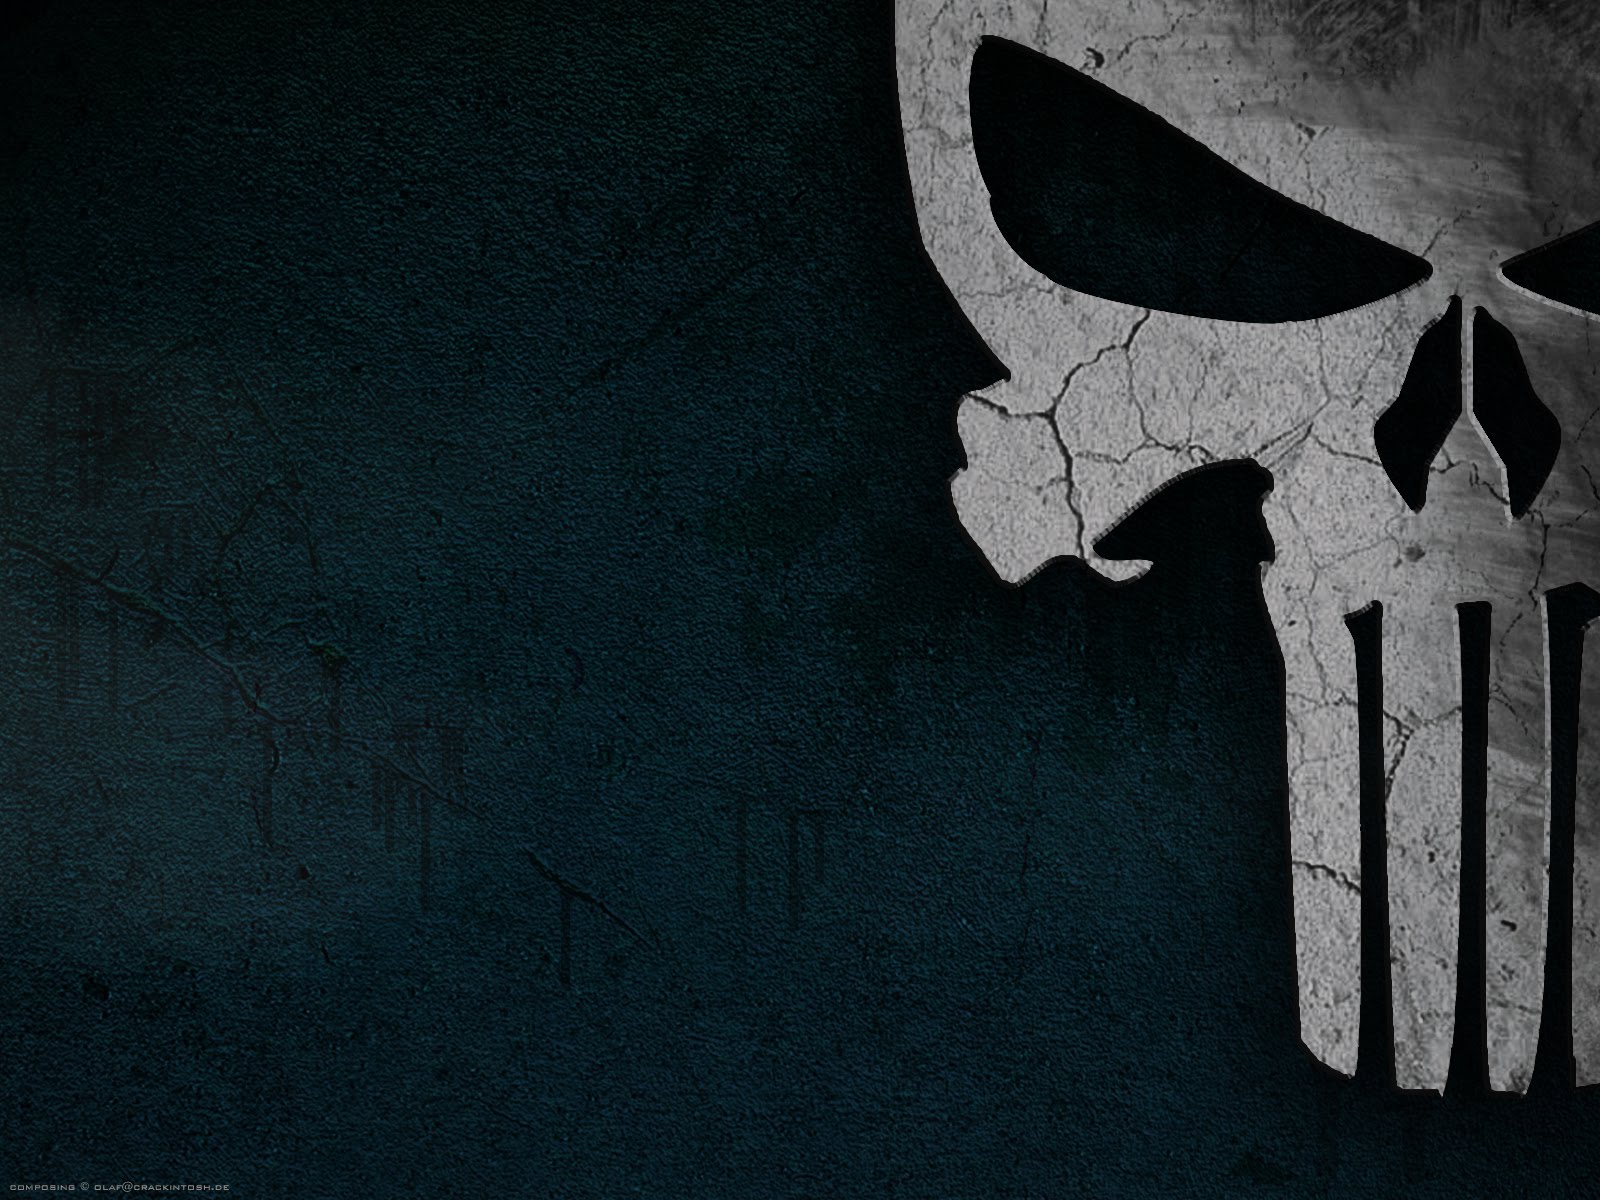 Punisher Skull Wallpaper Clickandseeworld Is All About HD Wallpapers Download Free Map Images Wallpaper [wallpaper376.blogspot.com]